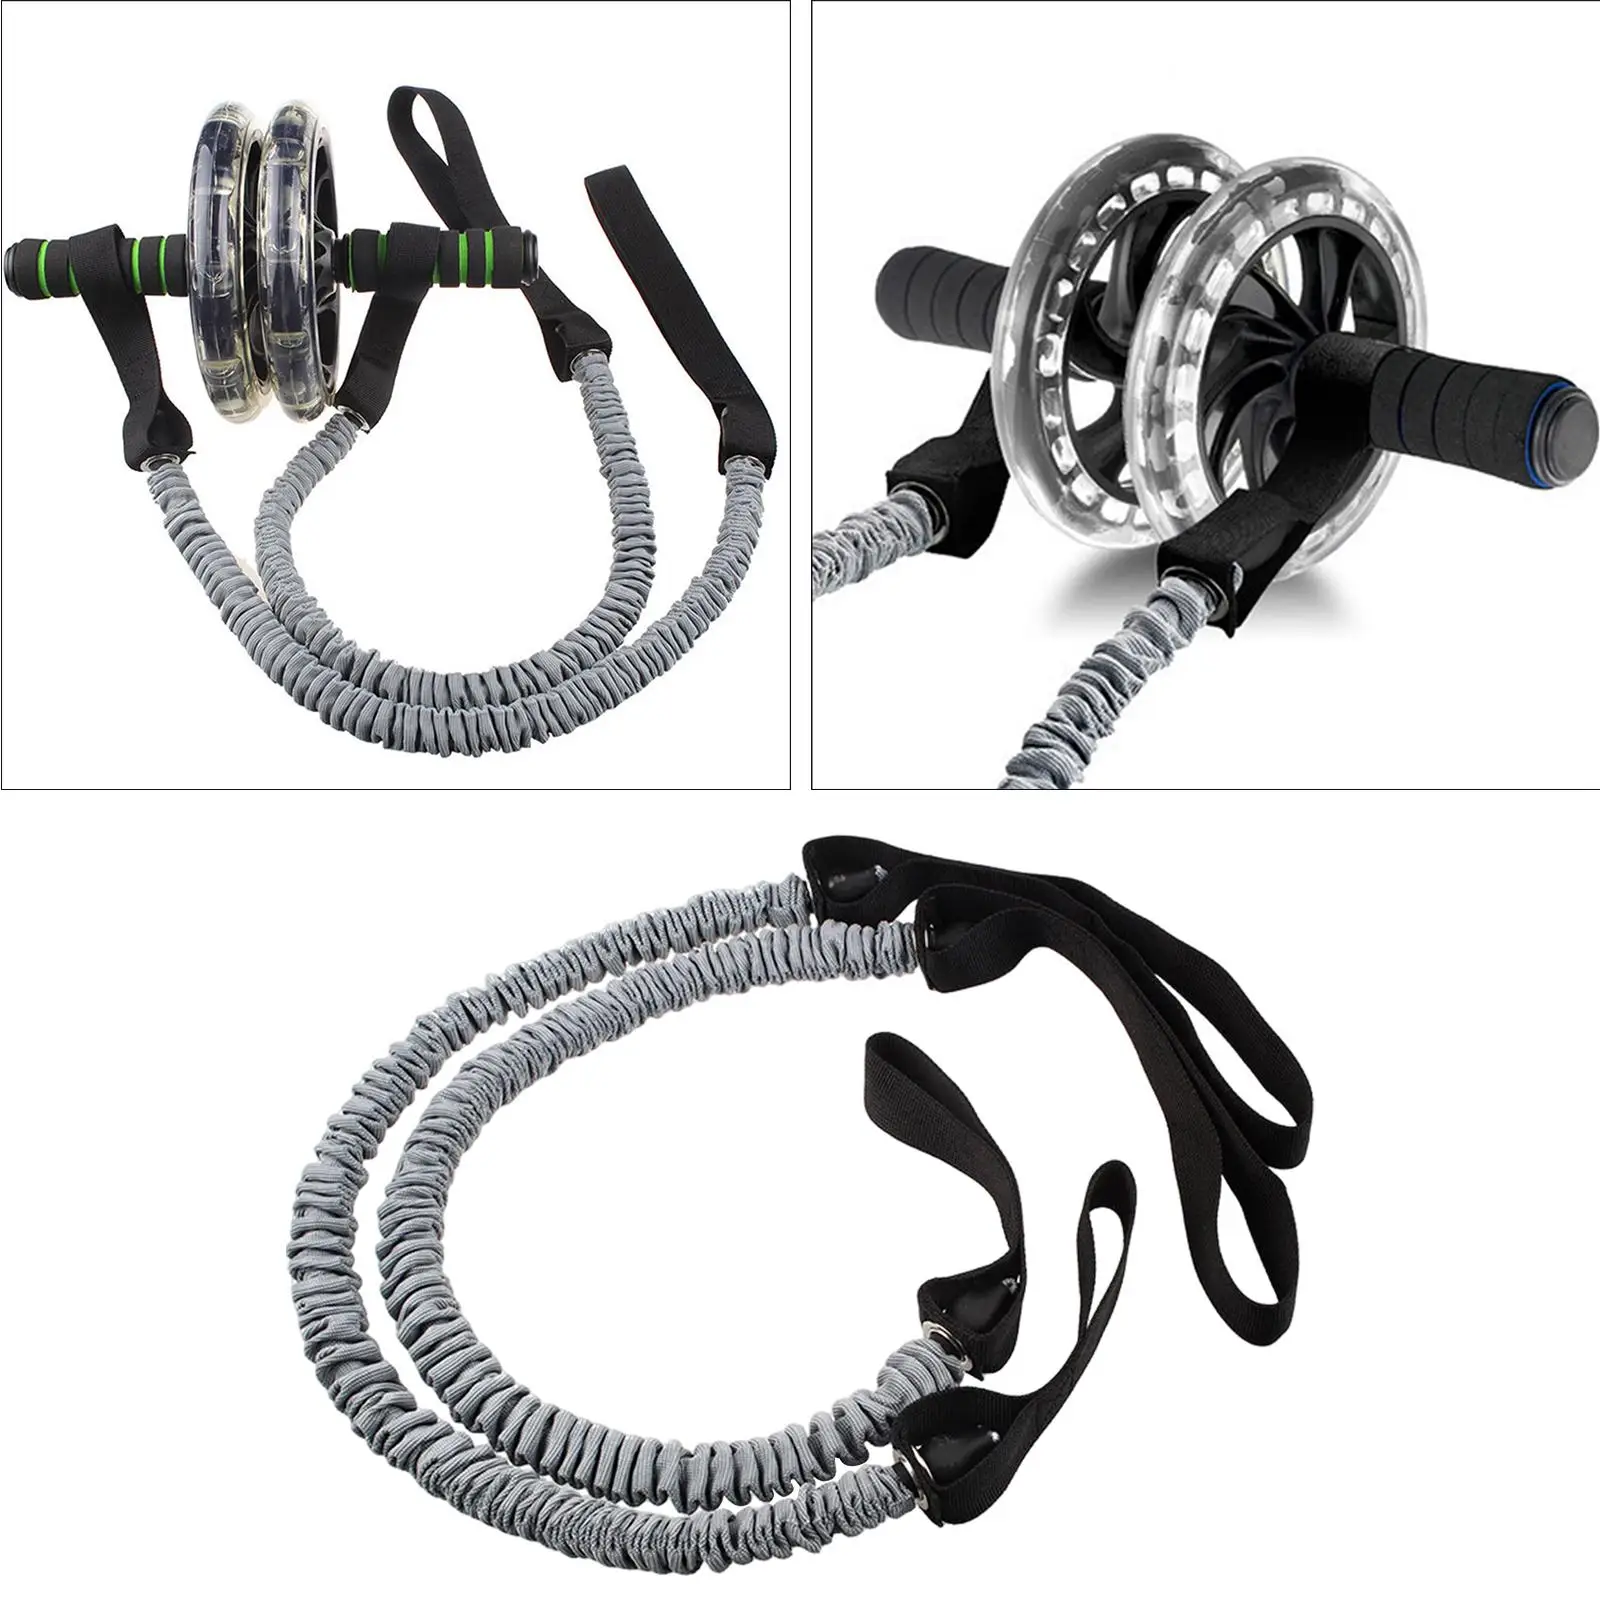 Abdominal Roller Wheel Pull Rope Exercise Wheels Gym Leg Stretch Pull up Band Accessory for Chest Back Shoulders Legs Workout